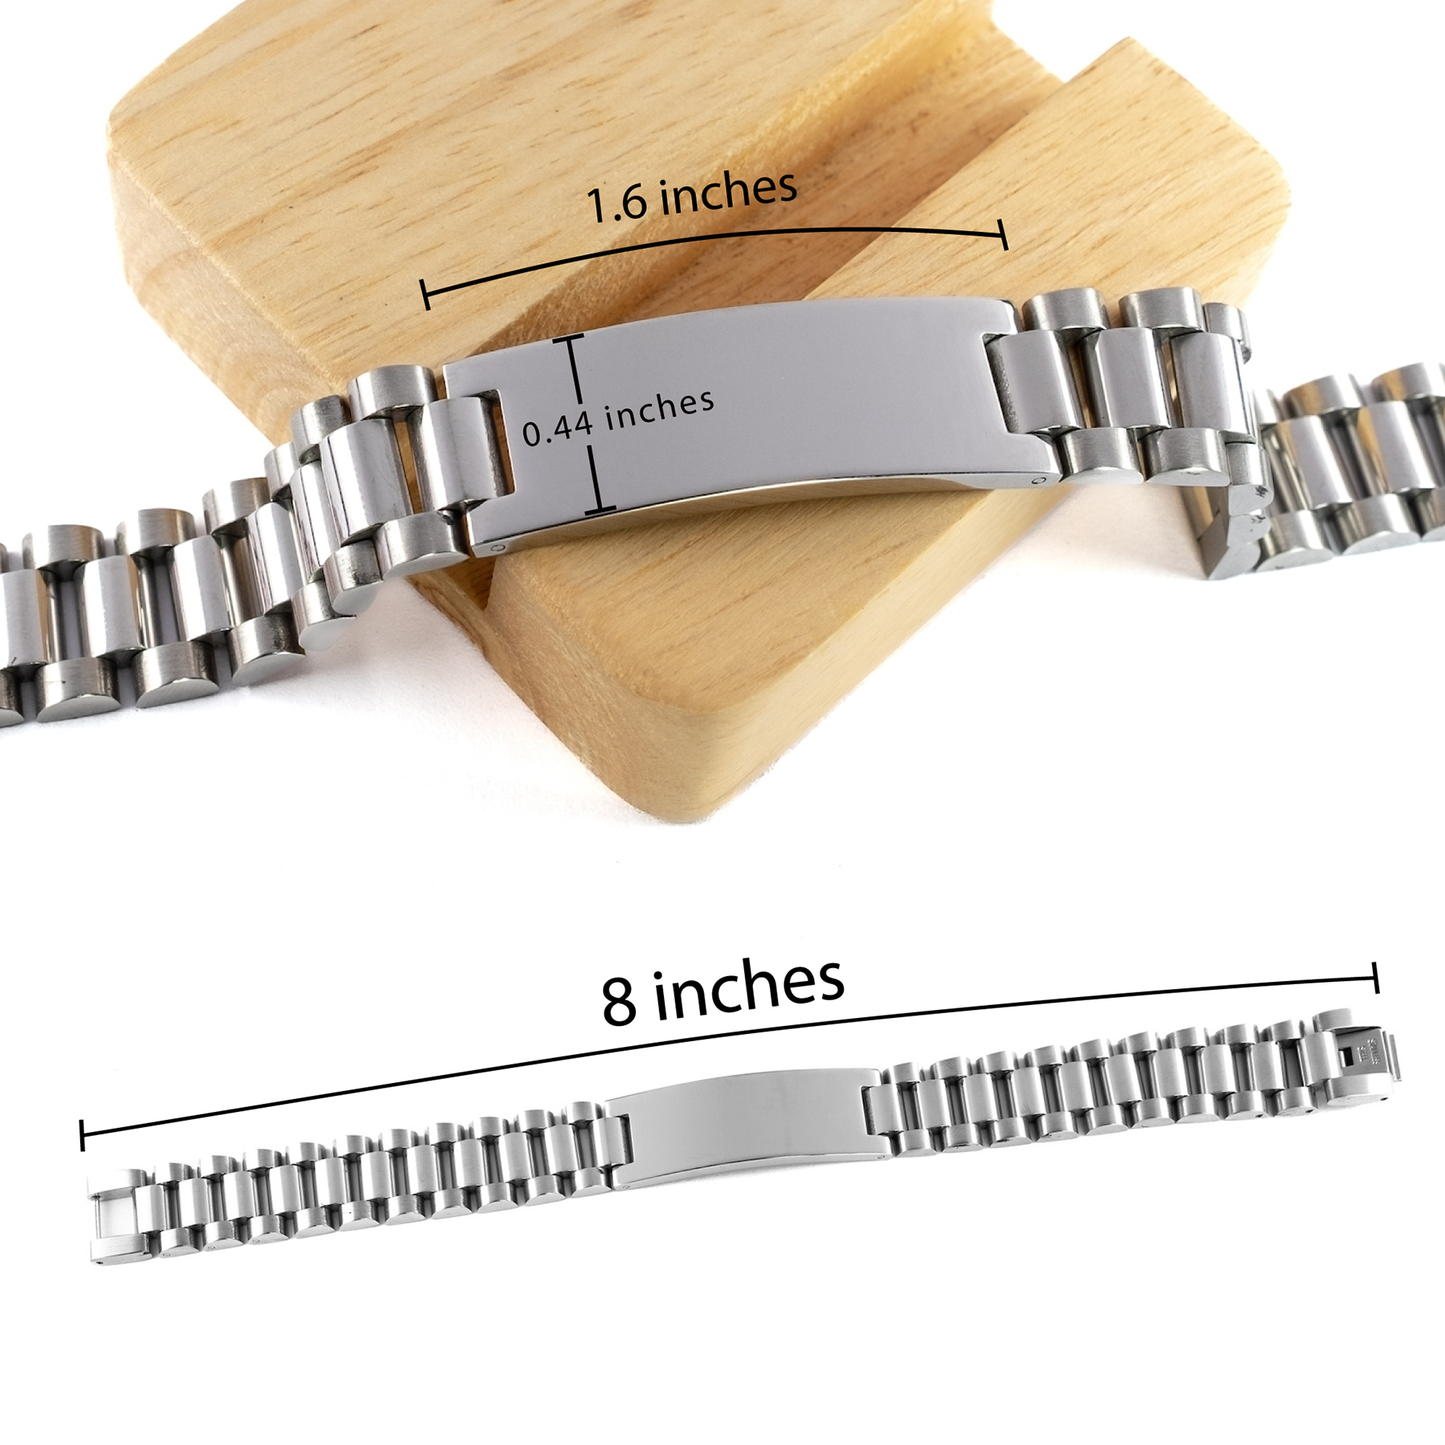 Grandad Stainless Steel Bracelet - You Will Always Have a Special Place in My Heart - Unique Engraved Gift for Grandad on Birthday, Christmas, Graduation - Grandfather Love and Appreciation Gift